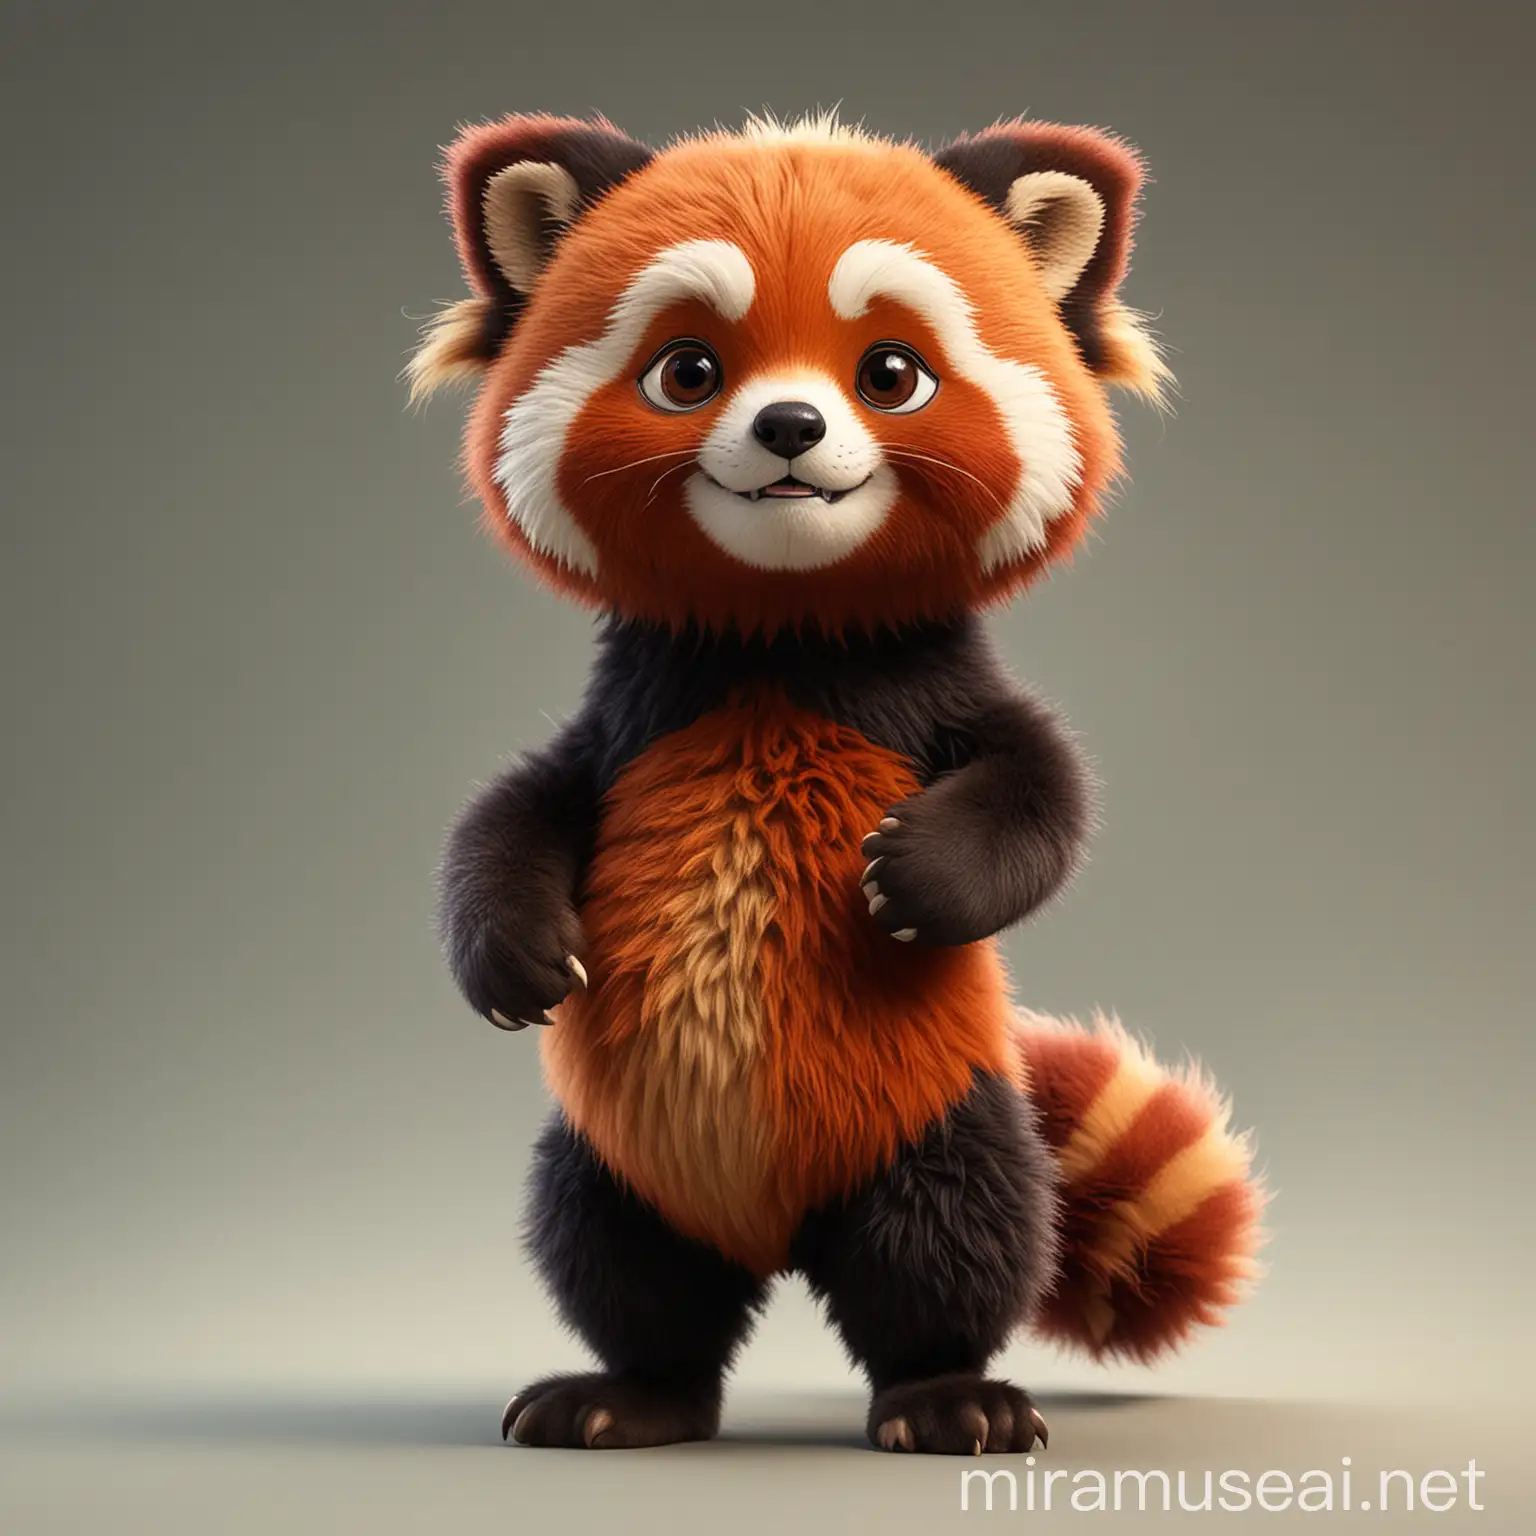 Adorable Pixar Style 3D Red Panda with Textured and Fluffy Fur